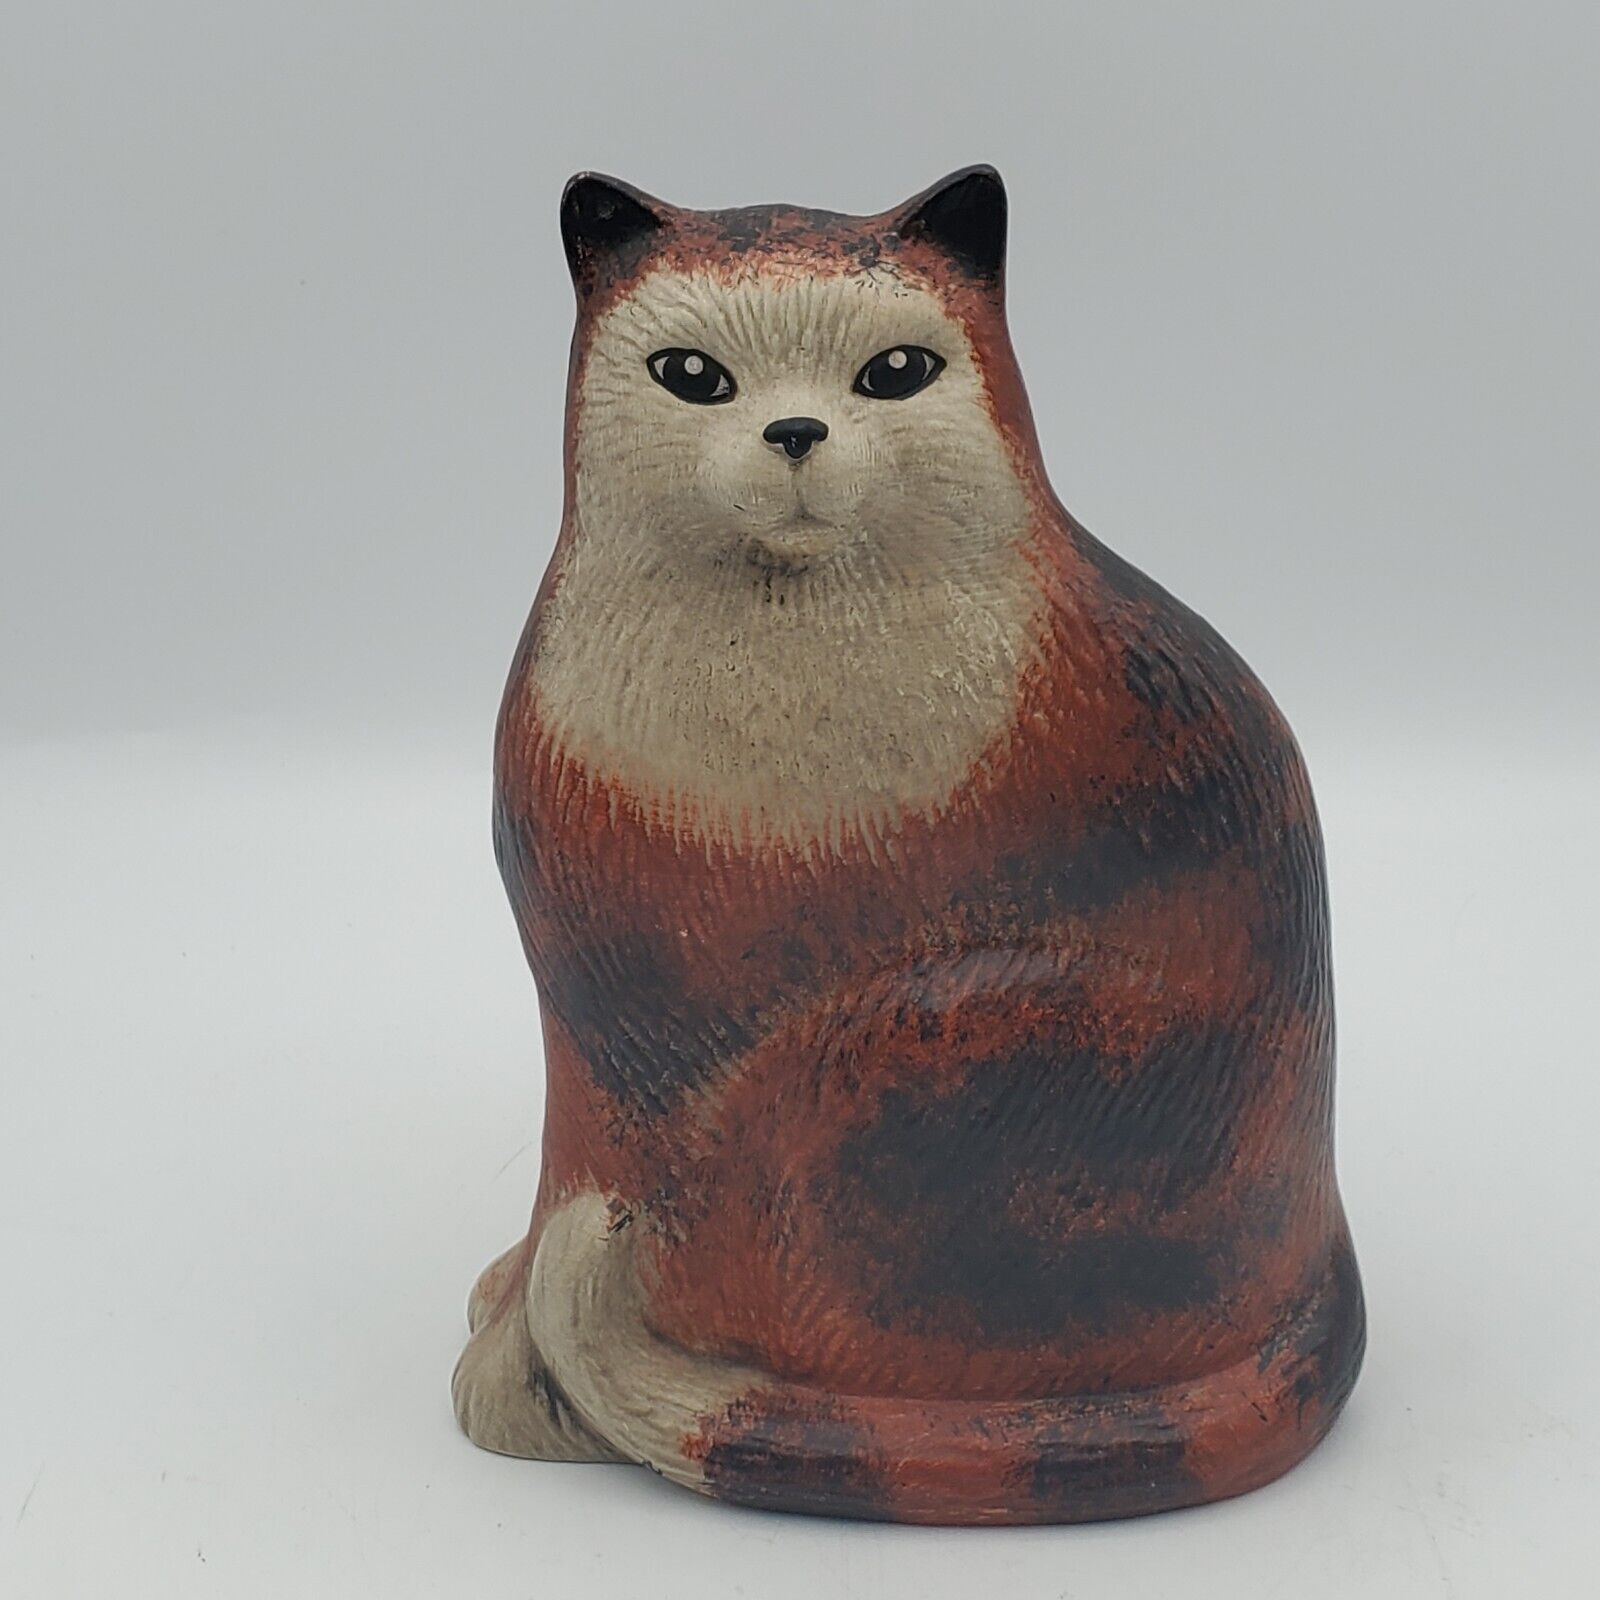 Katy's Country Charm Ceramic Cat By Karen Made in USA Signed